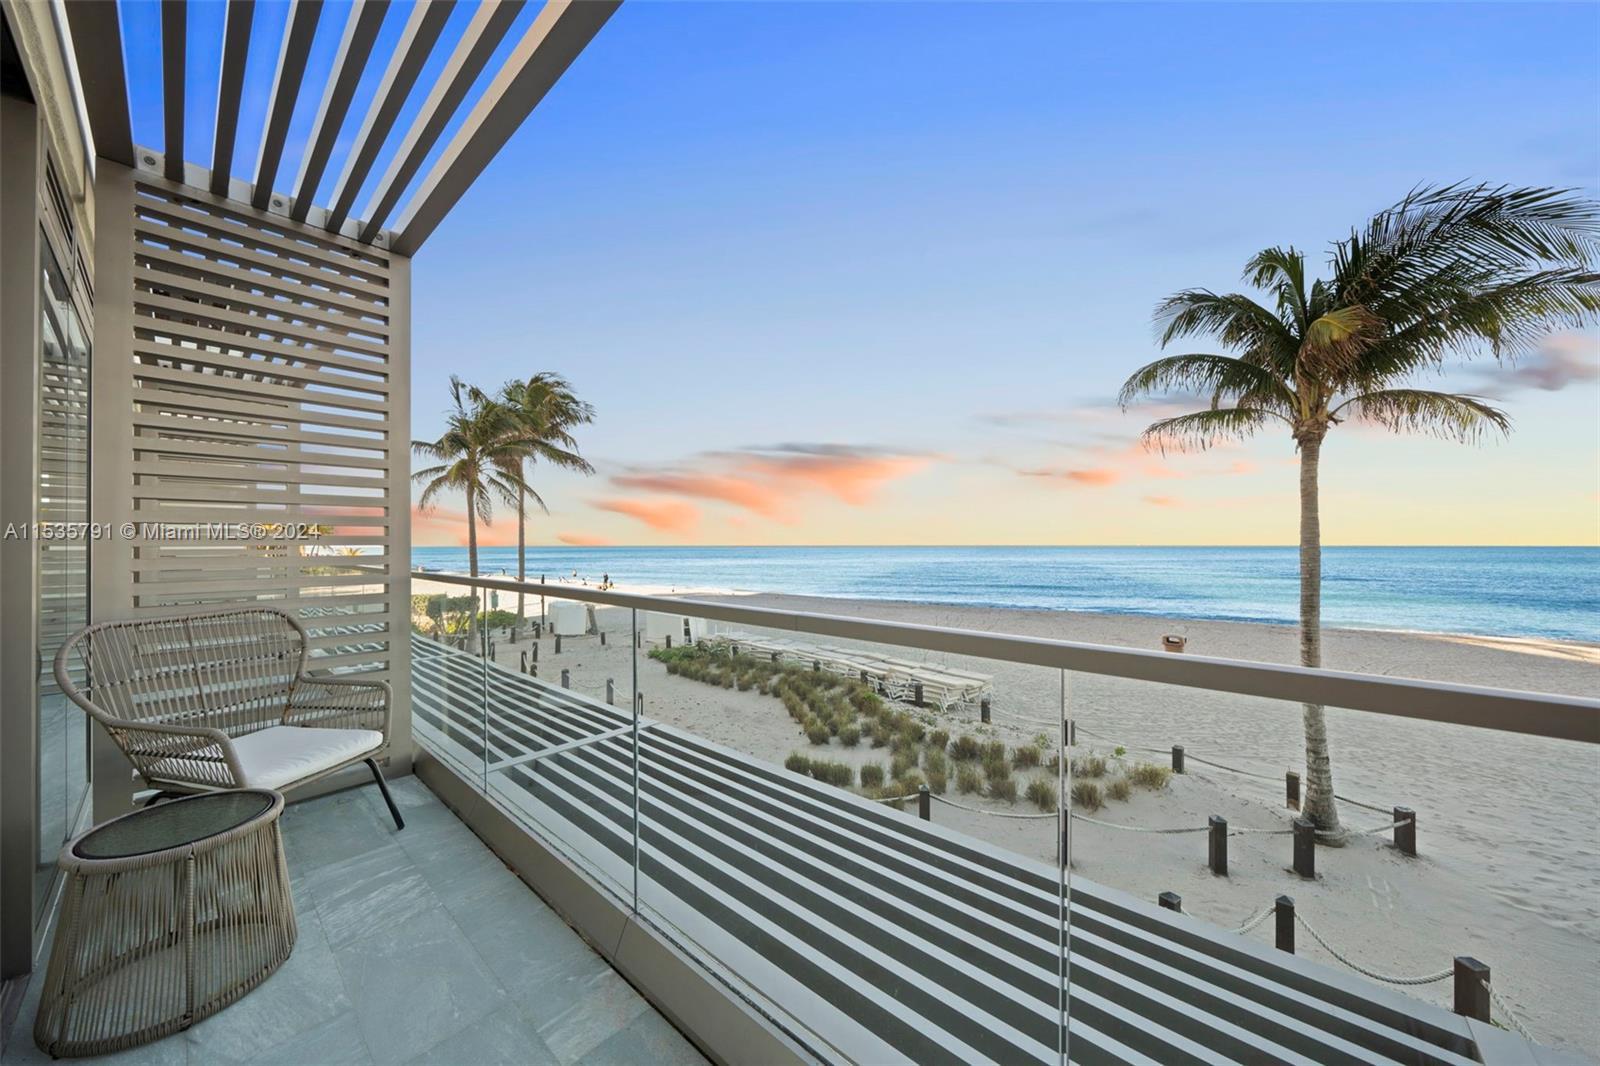 Located in the heart of Sunny Isles Beach at Armani Casa, this Cabana blends modern sophistication w